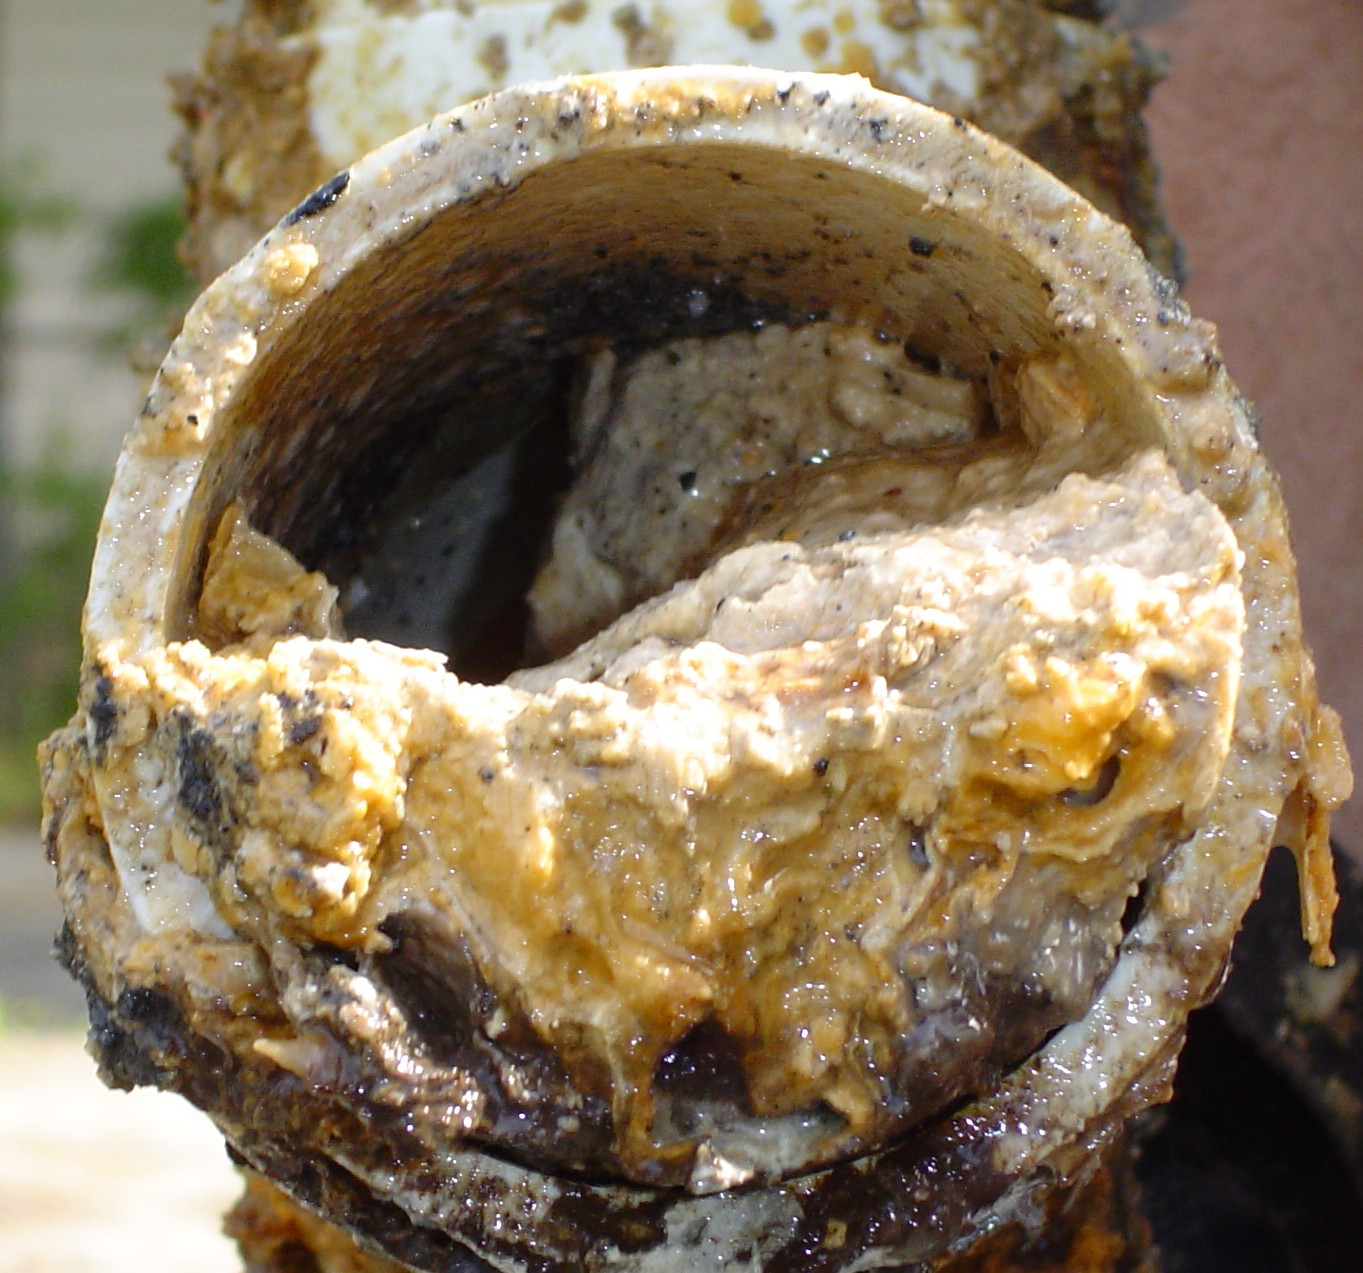 This is what extreme grease buildup looks like inside of a pipe. It can become so bad, the entire pipe will be completely clogged!